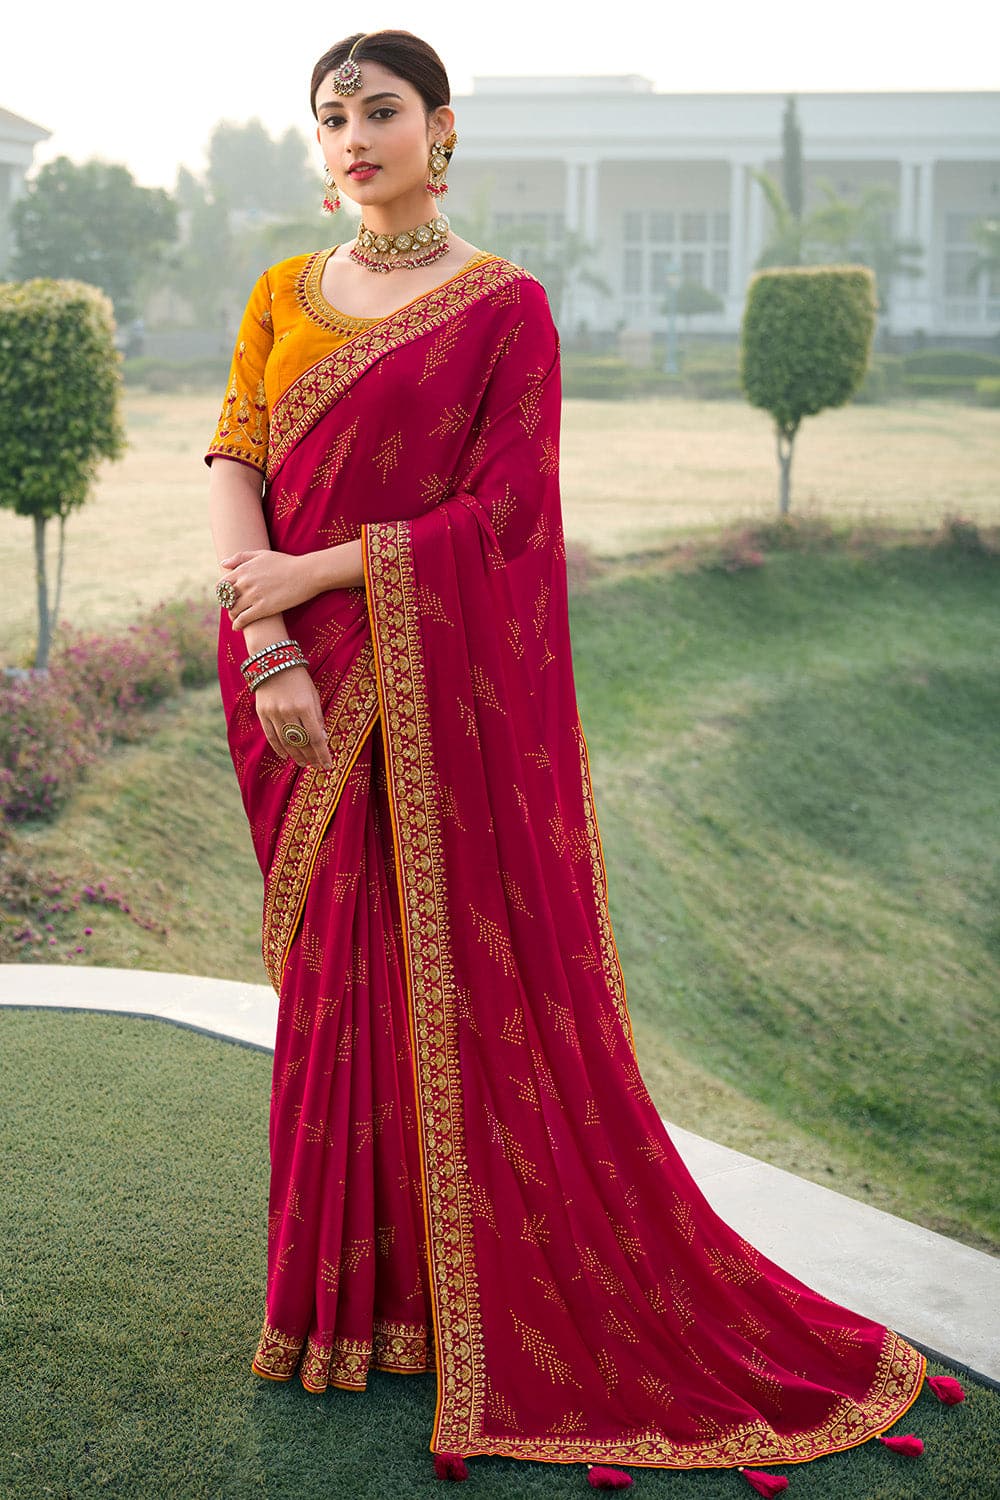 Buy Latest Party Wear Chiffon Saree Online In India | Me99